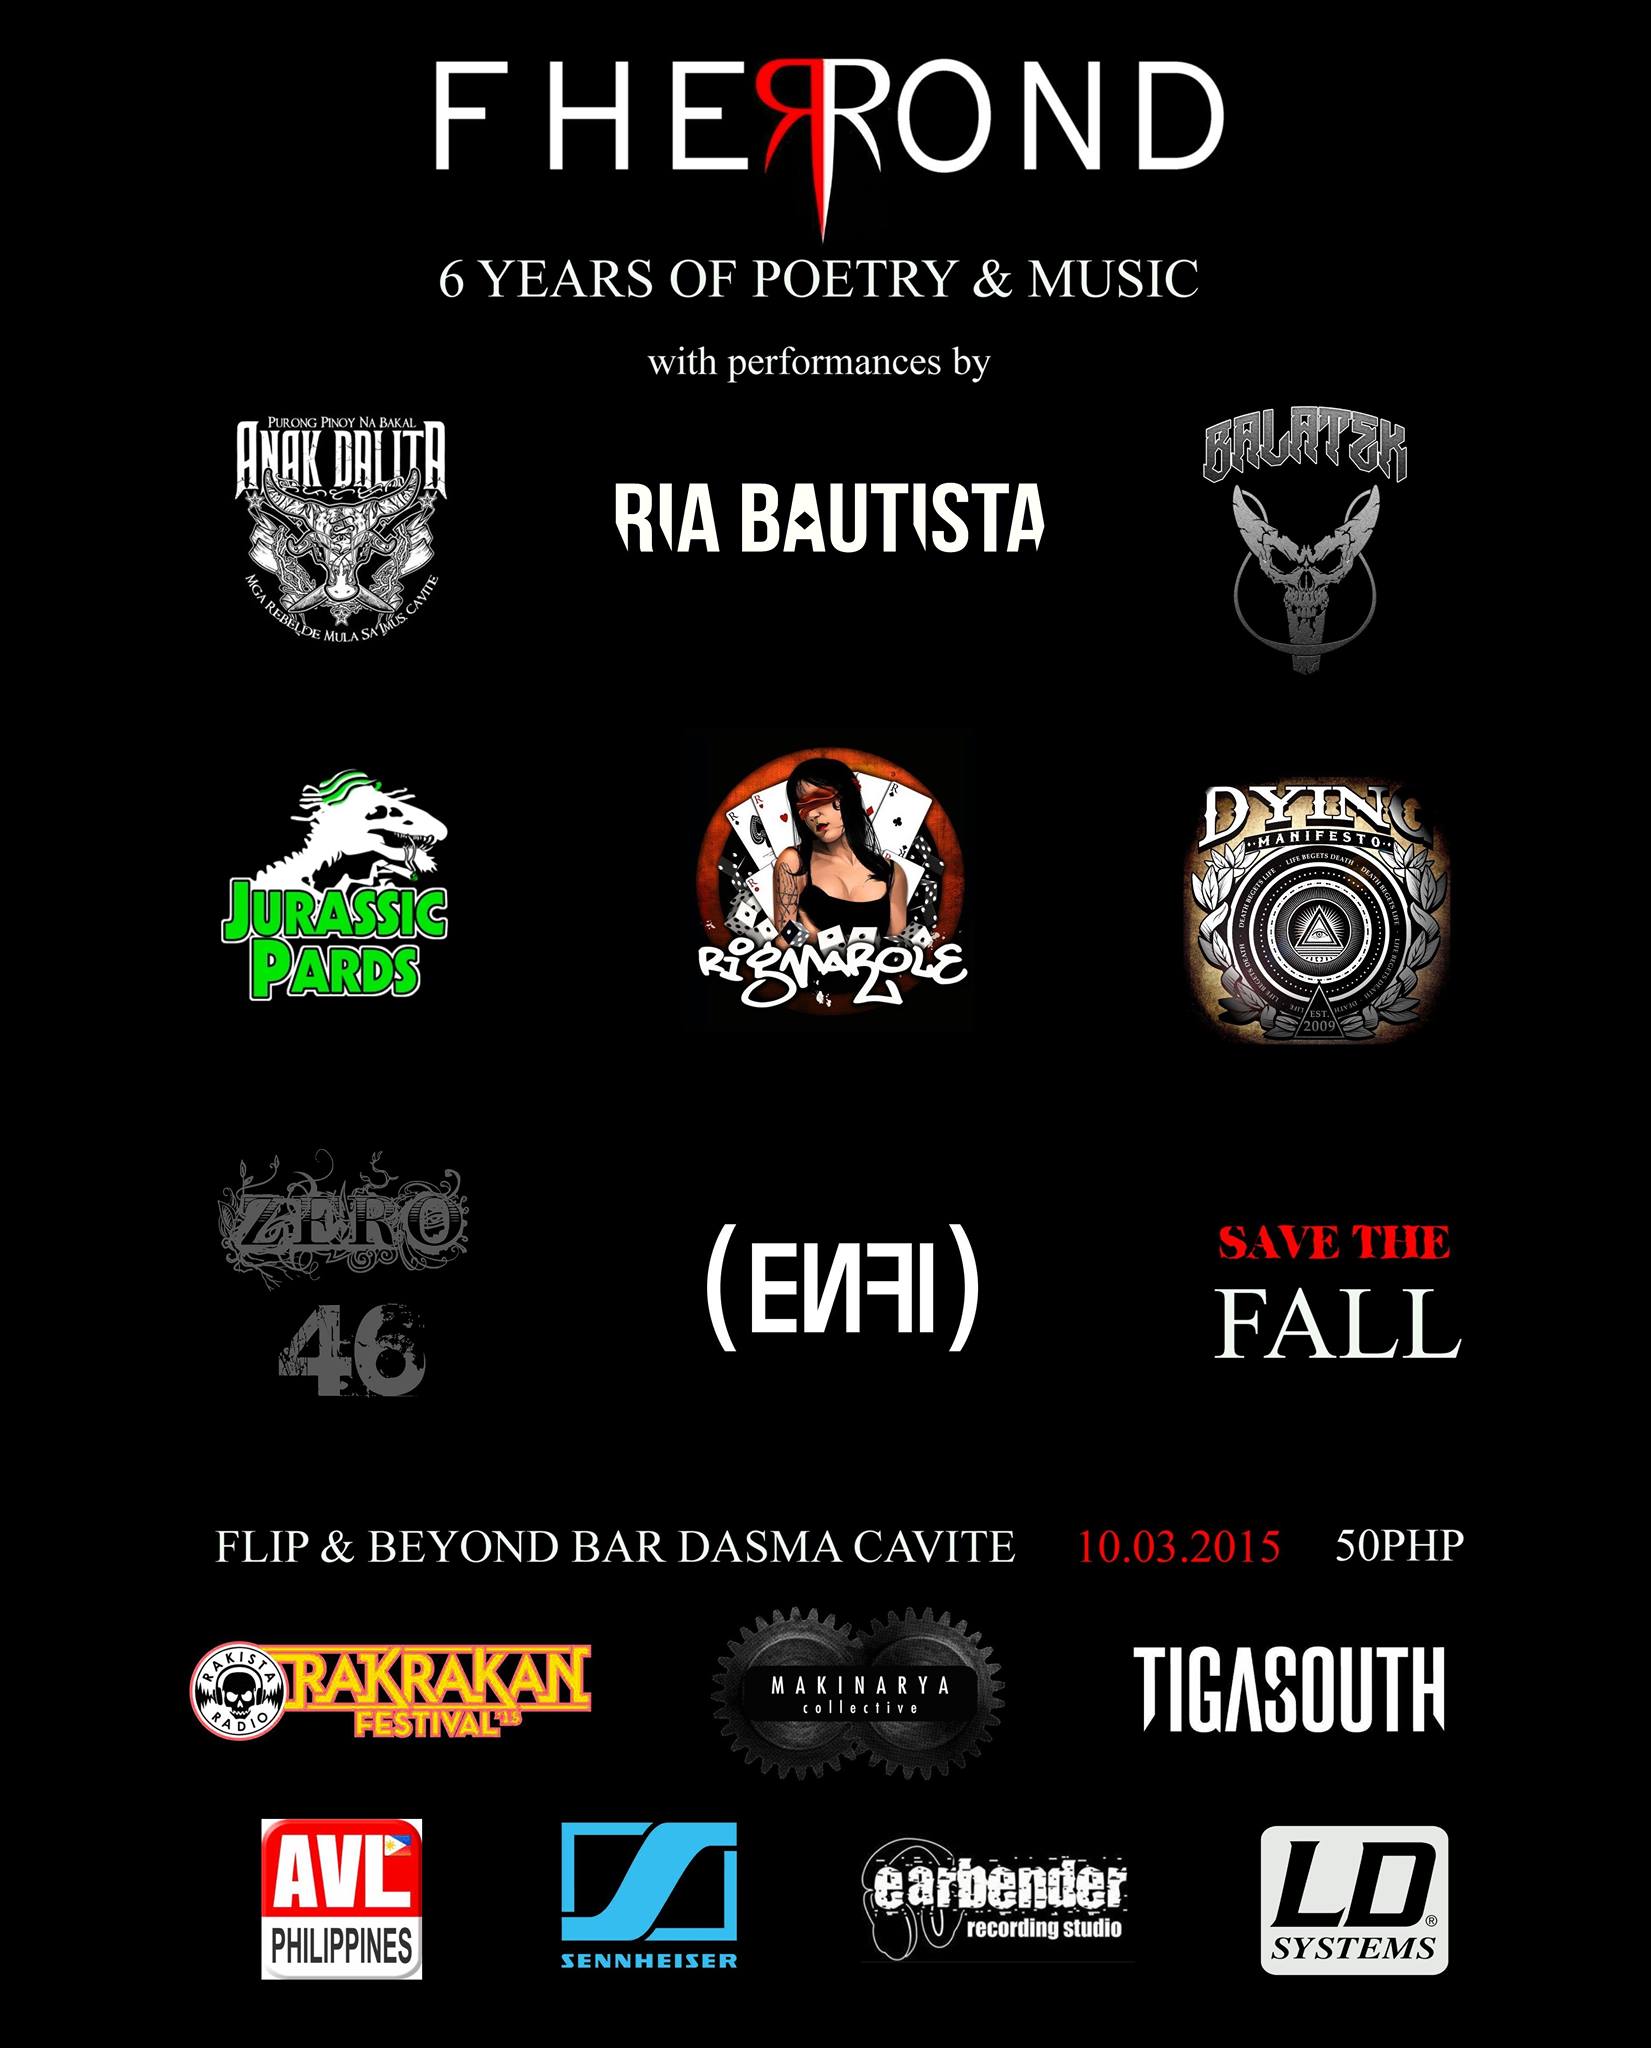 FHERROND 6 Years of Poetry and Music Saturday, October 3 at 7:00pm - 2:00am Oct 3 at 7:00pm to Oct 4 at 2:00am Show Map Flip and beyond Aguinaldo Highway San Agustin 2, 4114 Dasmariñas, Philippines Invited by Kadiboy Arvin Belarmino FHERROND 6 Years of Poetry and Music October 3, 2015 7PM Staurday Entrance : 50PHP w/ performances by RIA BAUTISTA BALATEK JURASSIC PARDS RIGMAROLE DYING MANIFESTO ZERO46 ANAK DALITA ENFI SAVE THE FALL Special Thanks to: SENNHEISER AVL PHILIPPINES RAKISTA LD SYSTEMS TIGASOUTH EARBENDER RECORDING STUDIO MAKINARYA COLLECTIVE